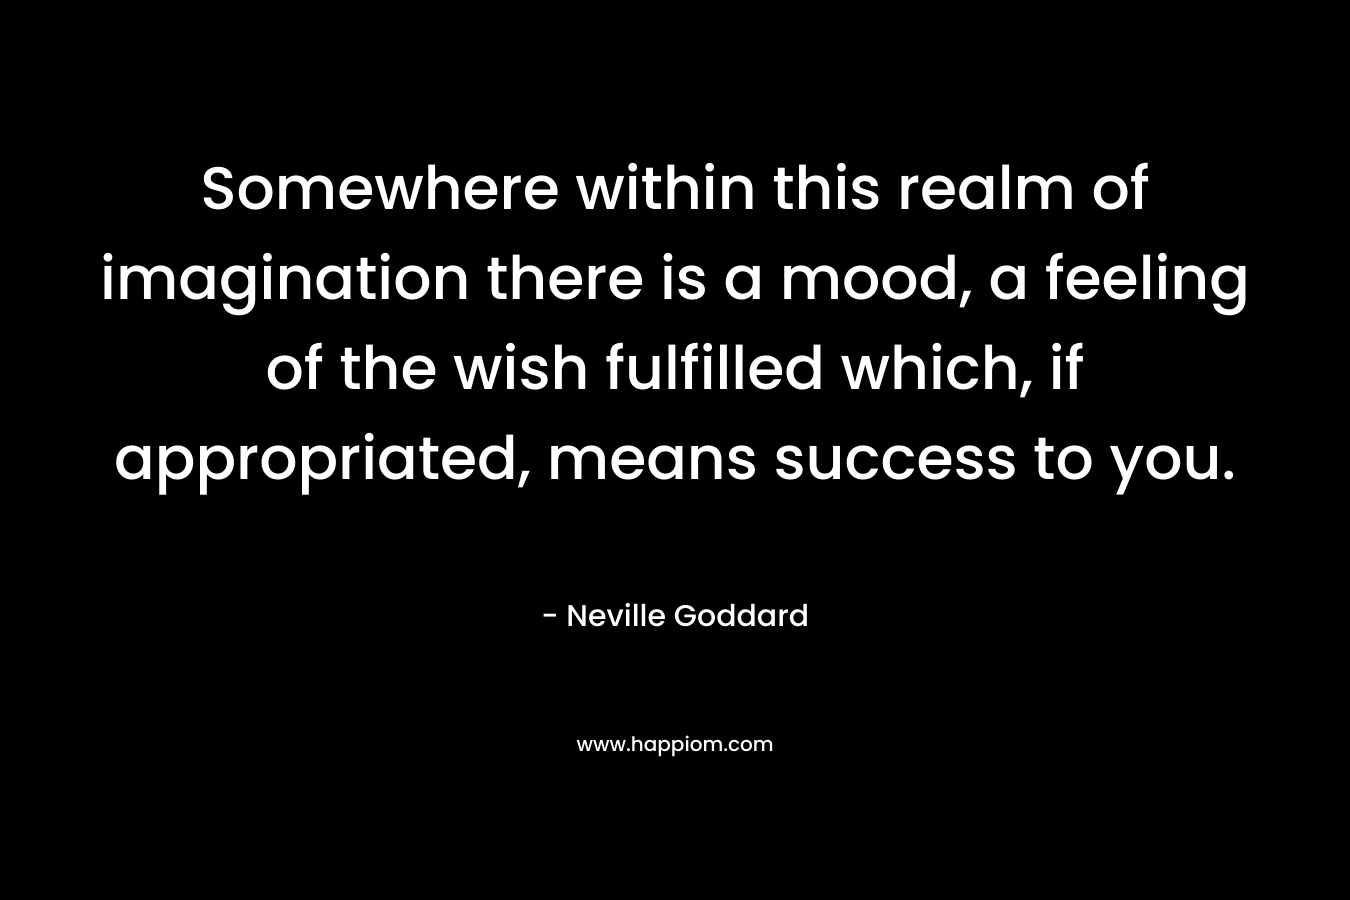 Somewhere within this realm of imagination there is a mood, a feeling of the wish fulfilled which, if appropriated, means success to you. – Neville Goddard